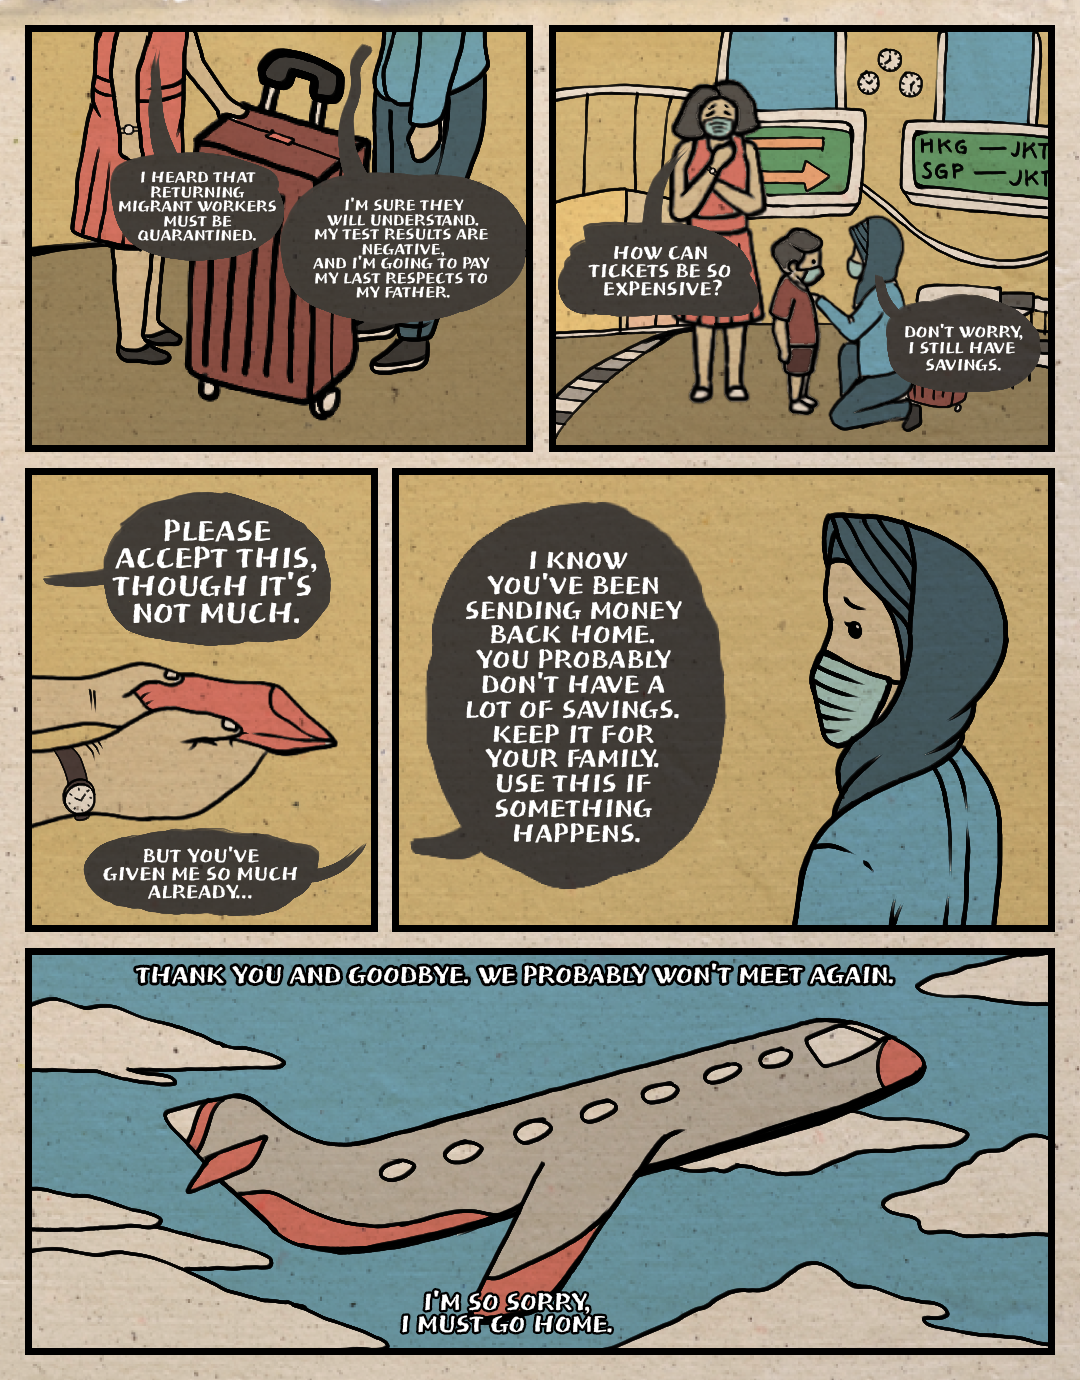 Page 2: A comic page of five panels in full colour, with black lines.
Panel 1: Siti and her employer are at the airport. Employer: “I heard that returning migrant workers must be quarantined.” Siti: “I’m sure they will understand. My test results are negative, and I’m going to pay my last respects to my father.”
Panel 2: They are standing in the departure hall. Siti has a suitcase beside her. Employer: “How can tickets be so expensive?” Siti: “Don’t worry, I still have savings.”
Panel 3: The employer hands an envelope to Siti. Employer: “Please accept this, though it’s not much.” Siti: “But you’ve given me so much already…”
Panel 4: Siti looks at her employer, who continues speaking: “I know you’ve been sending money back home. You probably don’t have a lot of savings. Keep it for your family; use this if something happens. 
Panel 5: the airplane takes off into the sky. Seated within, Siti murmurs in her heart: “Thank you, and goodbye. We probably won’t meet again. I’m so sorry. I must go home.”
